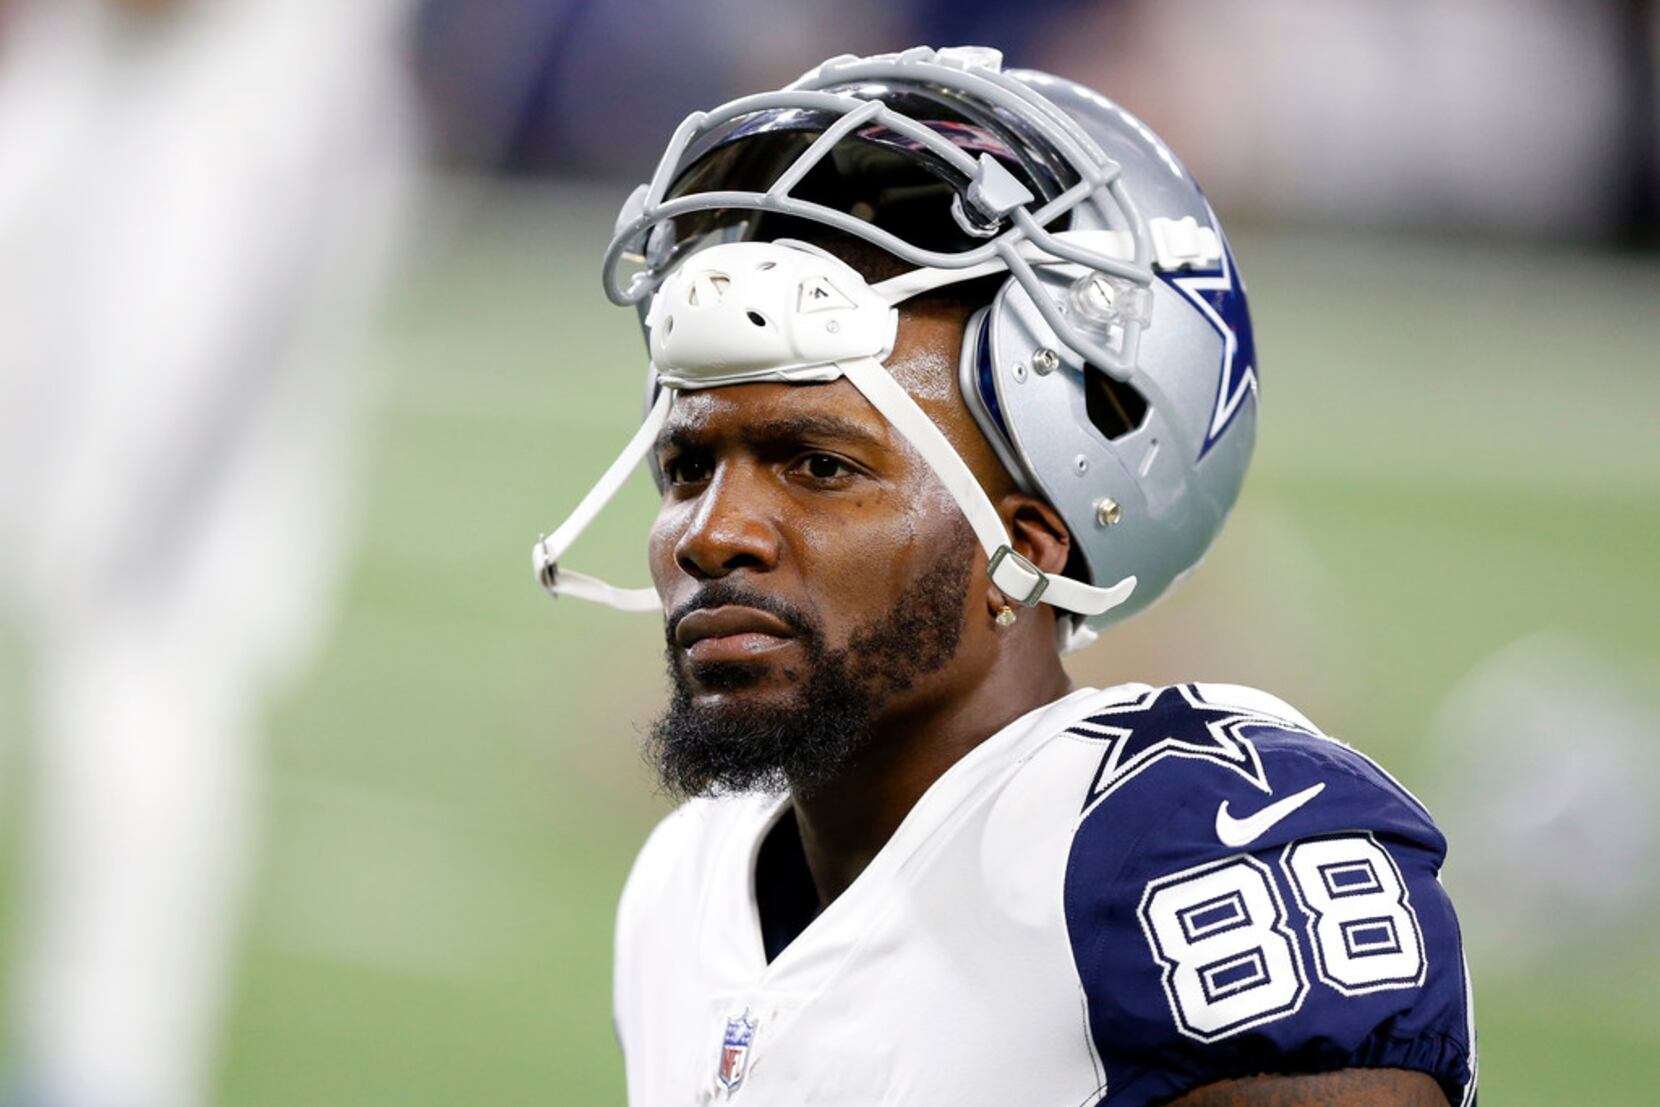 Flashback: The turmoil that roiled Dez Bryant, agent during 2015